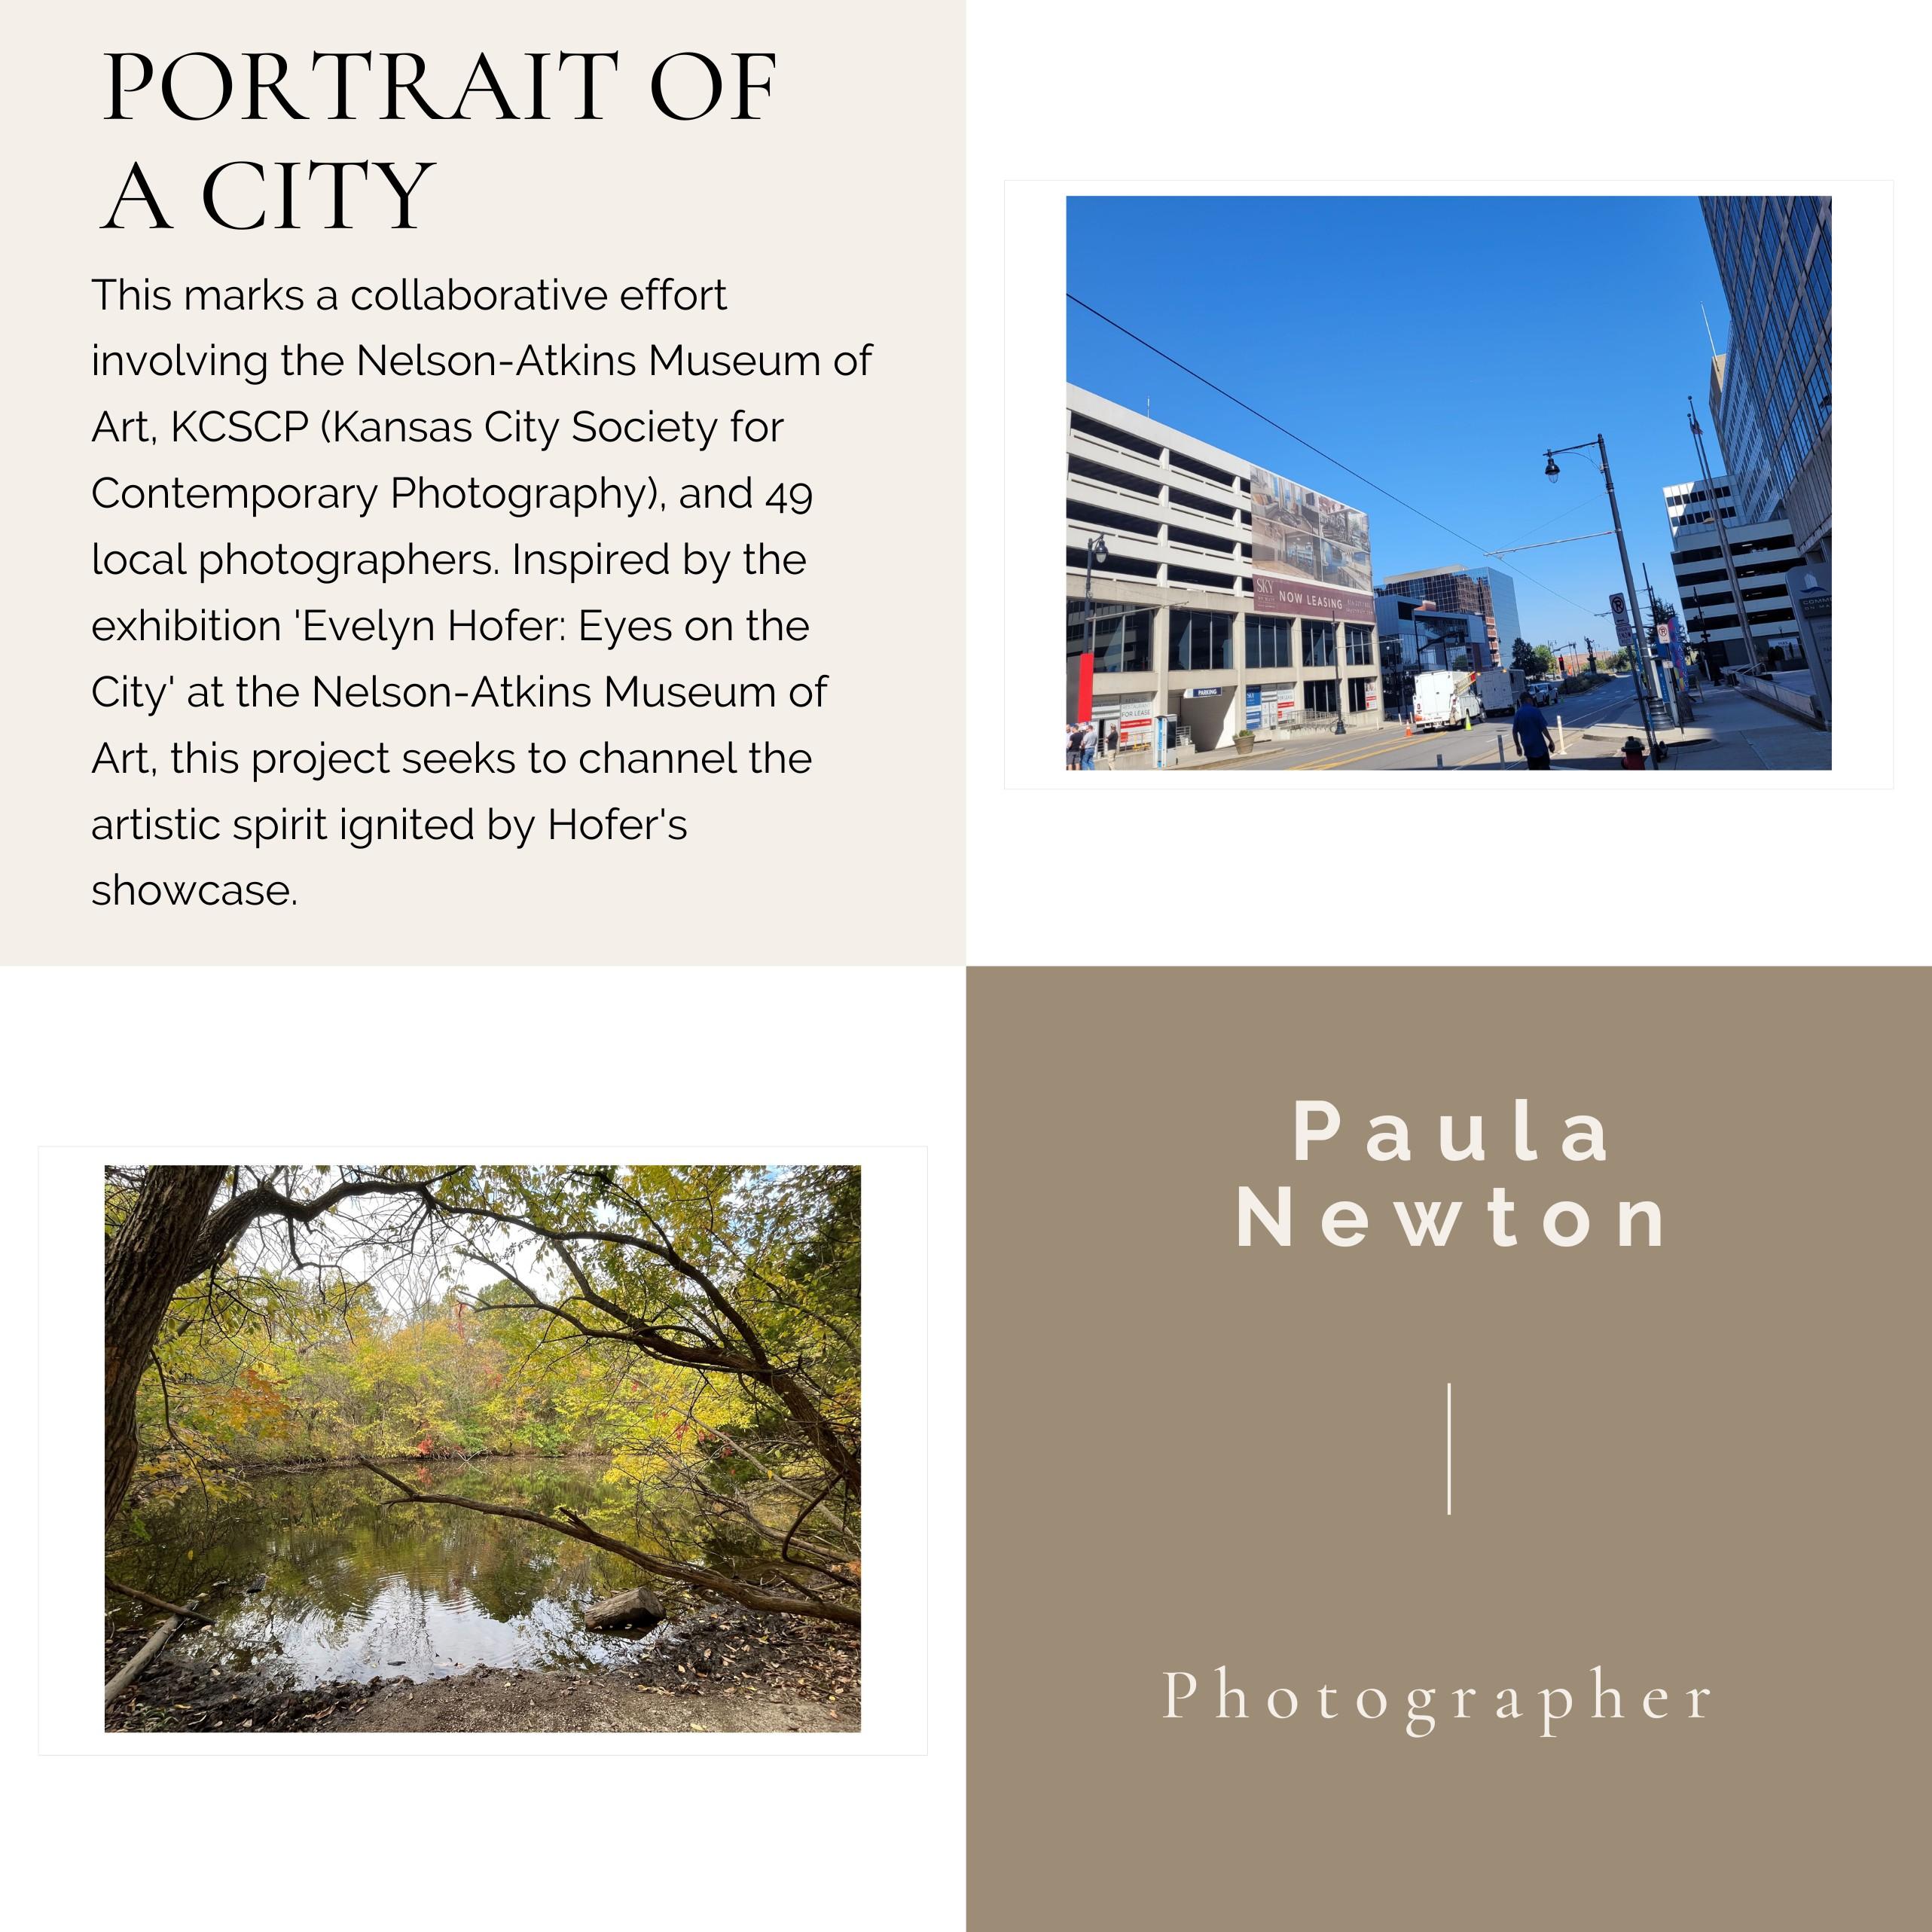 Paula Newton
Along the Bus Route Street
Year: 2024
Archival Pigment Print on
Hahnemuehle Baryta Rag
Framed Size: 13 x 13 x 0.25 inches
COA provided
*Ready to hang; matted and framed in a minimal black frame made from composite wood with standard